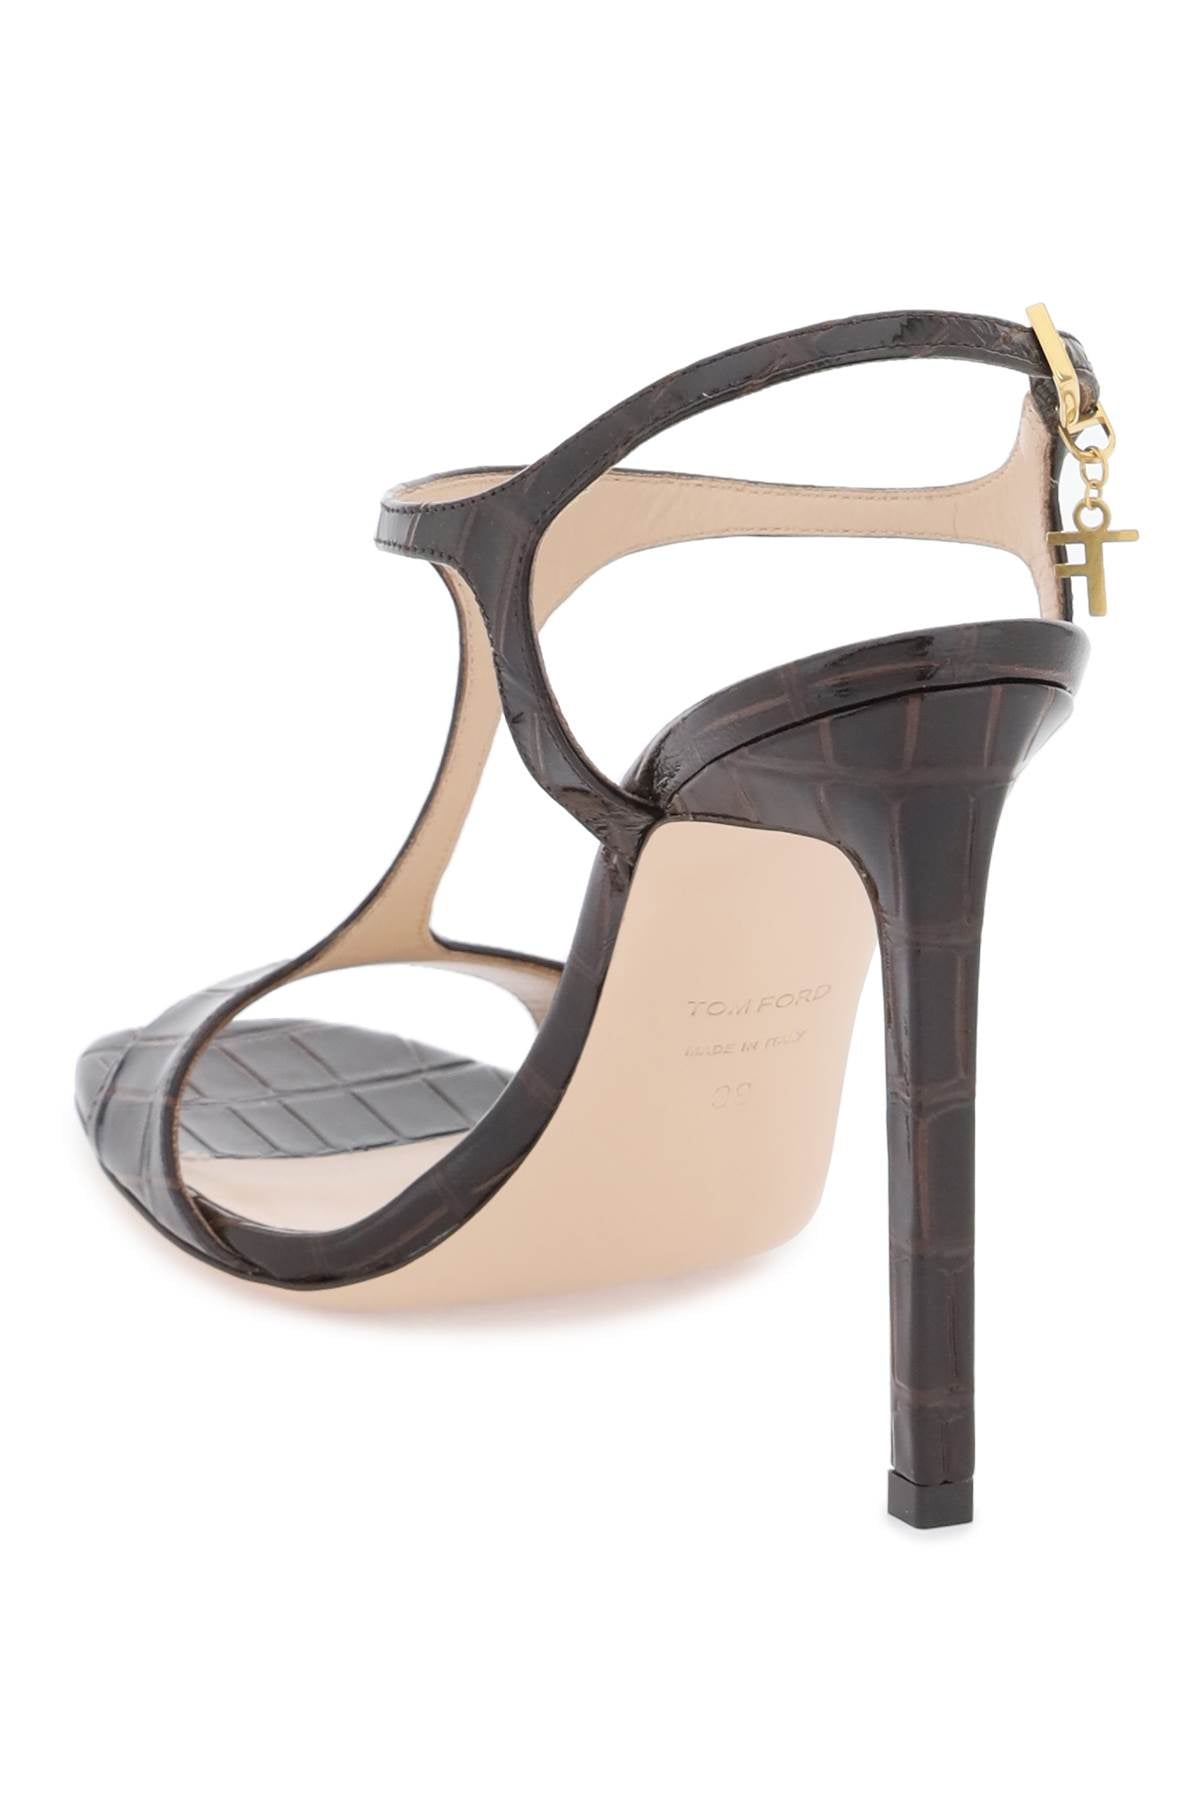 Tom ford angelina sandals in croco-embossed glossy leather-2